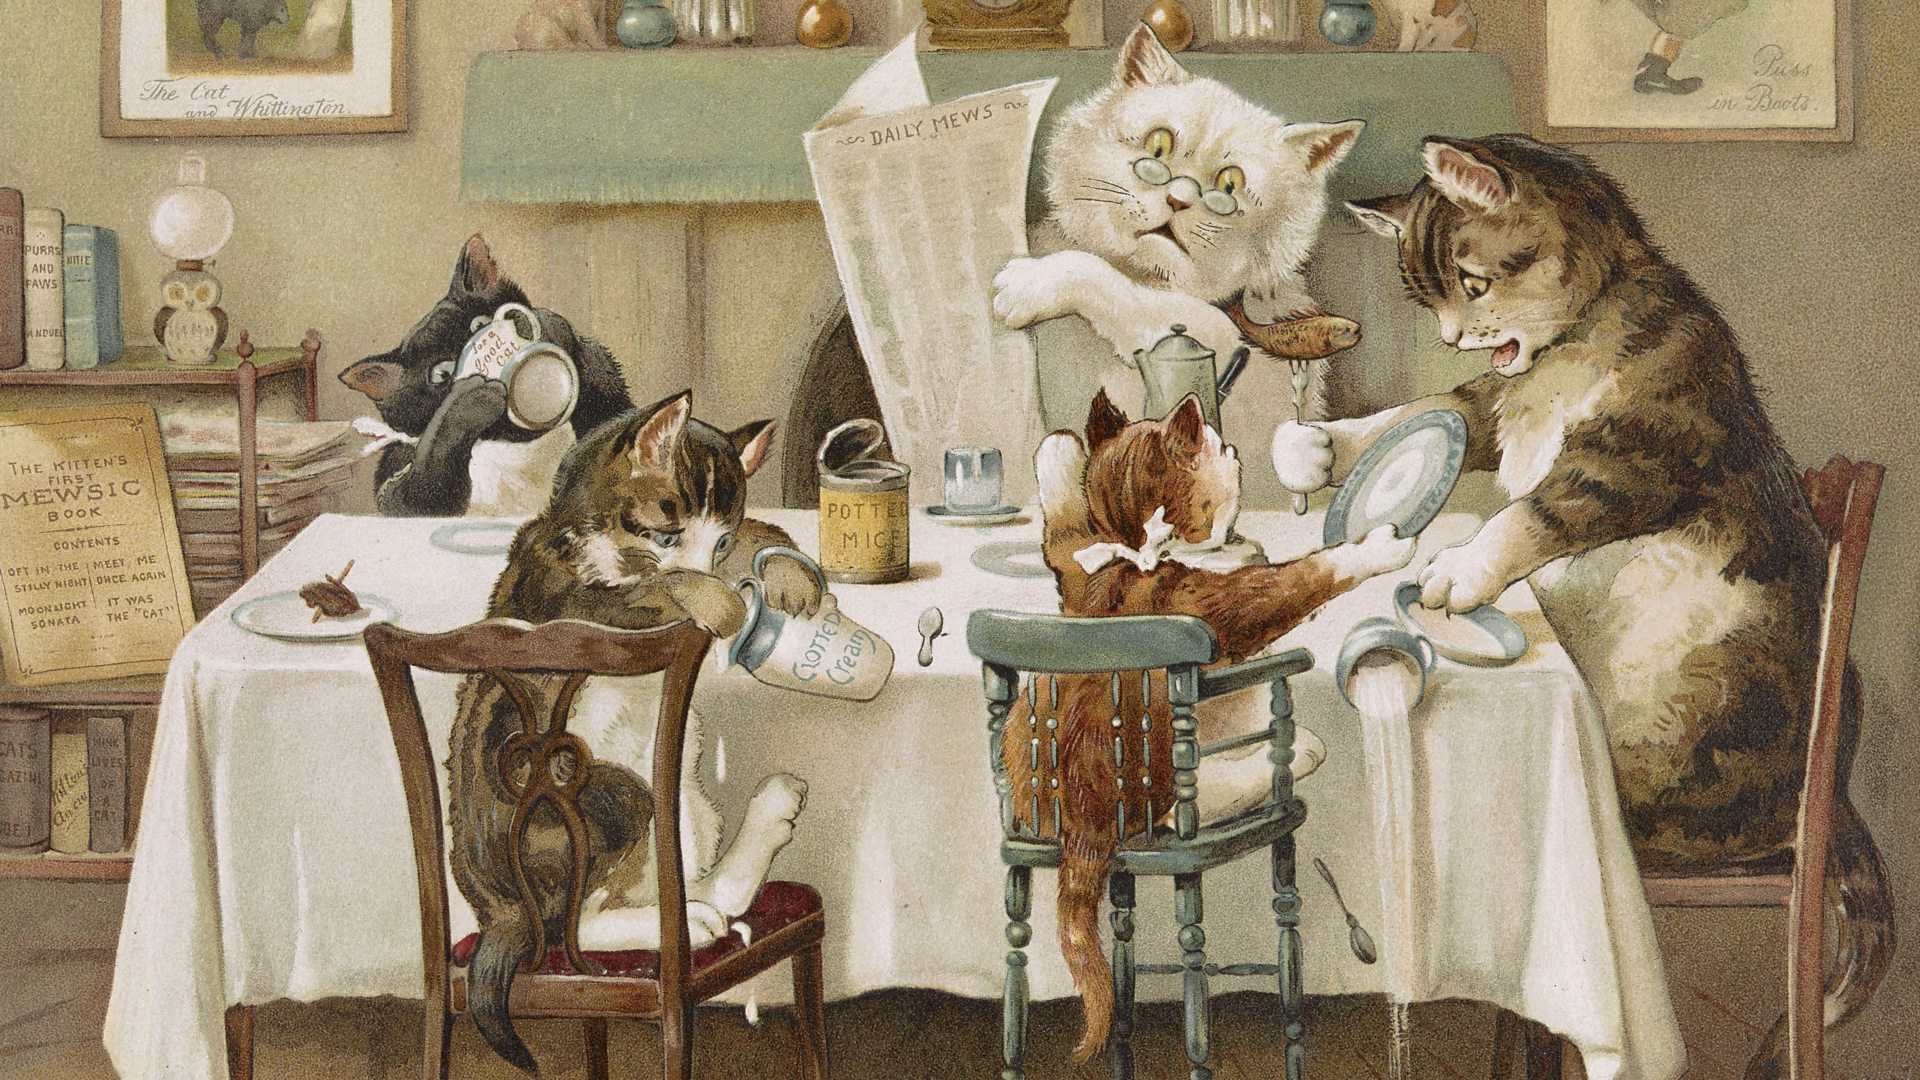 A celebration of cats: The creative brilliance of artist Louis